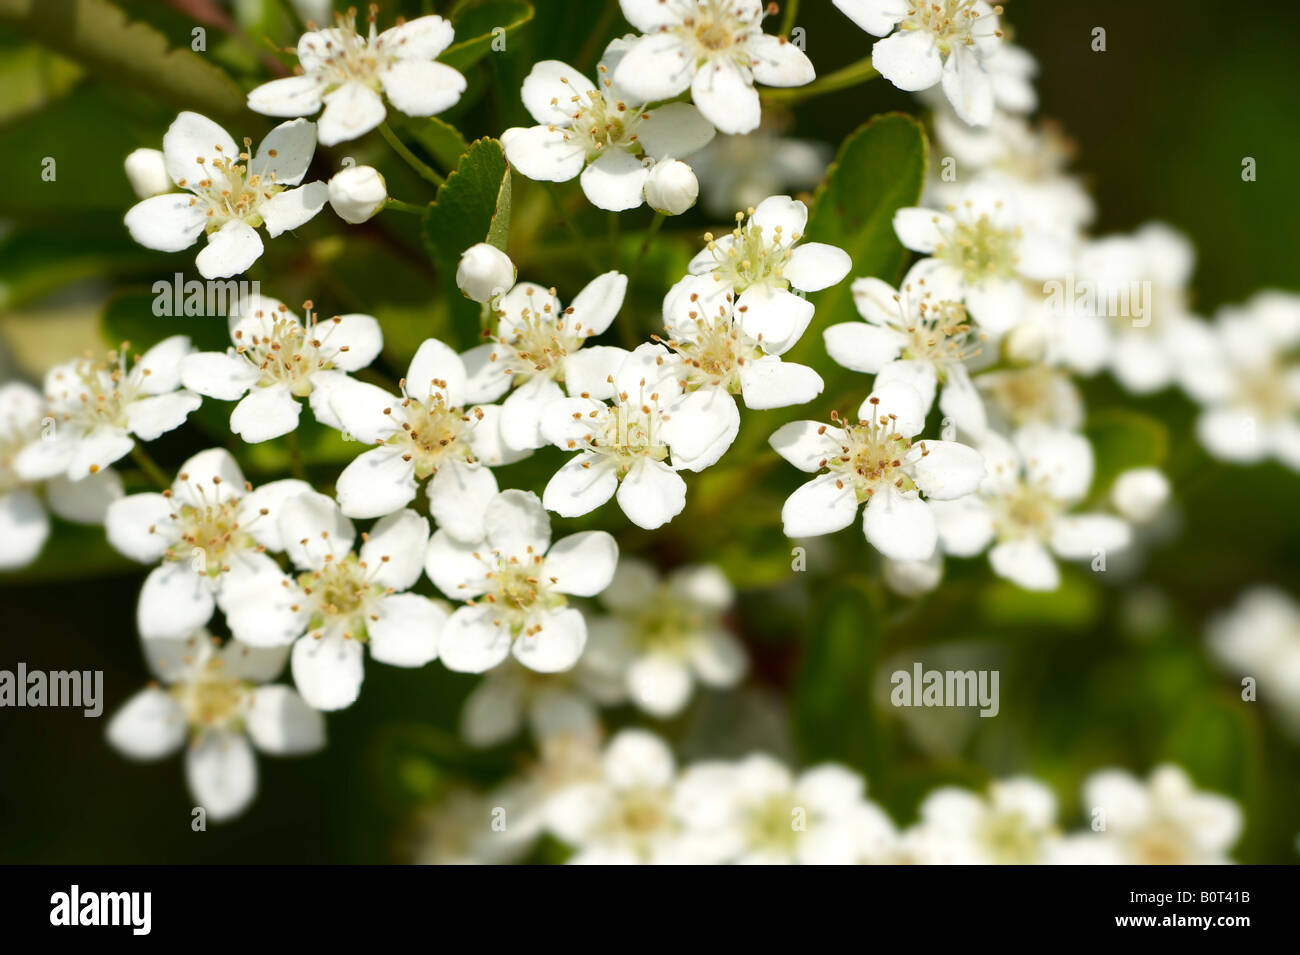 White Pyracantha Blossom growing in sunlight Stock Photo